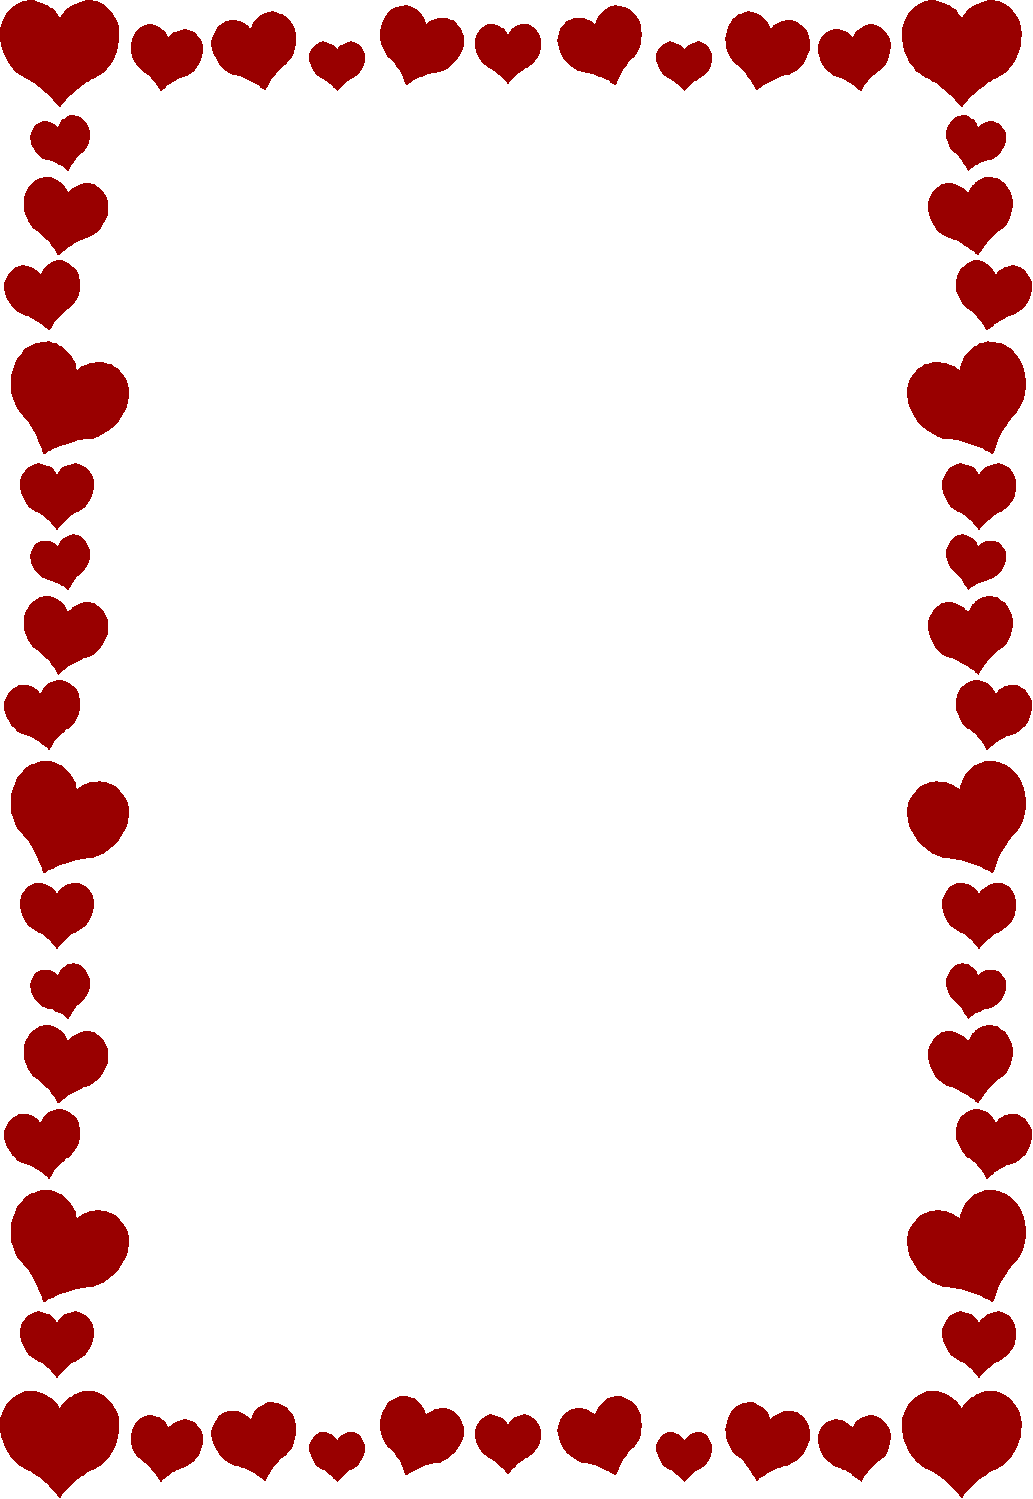 Free Heart Border For Word Download Free Heart Border For Word Png Images Free Cliparts On Clipart Library